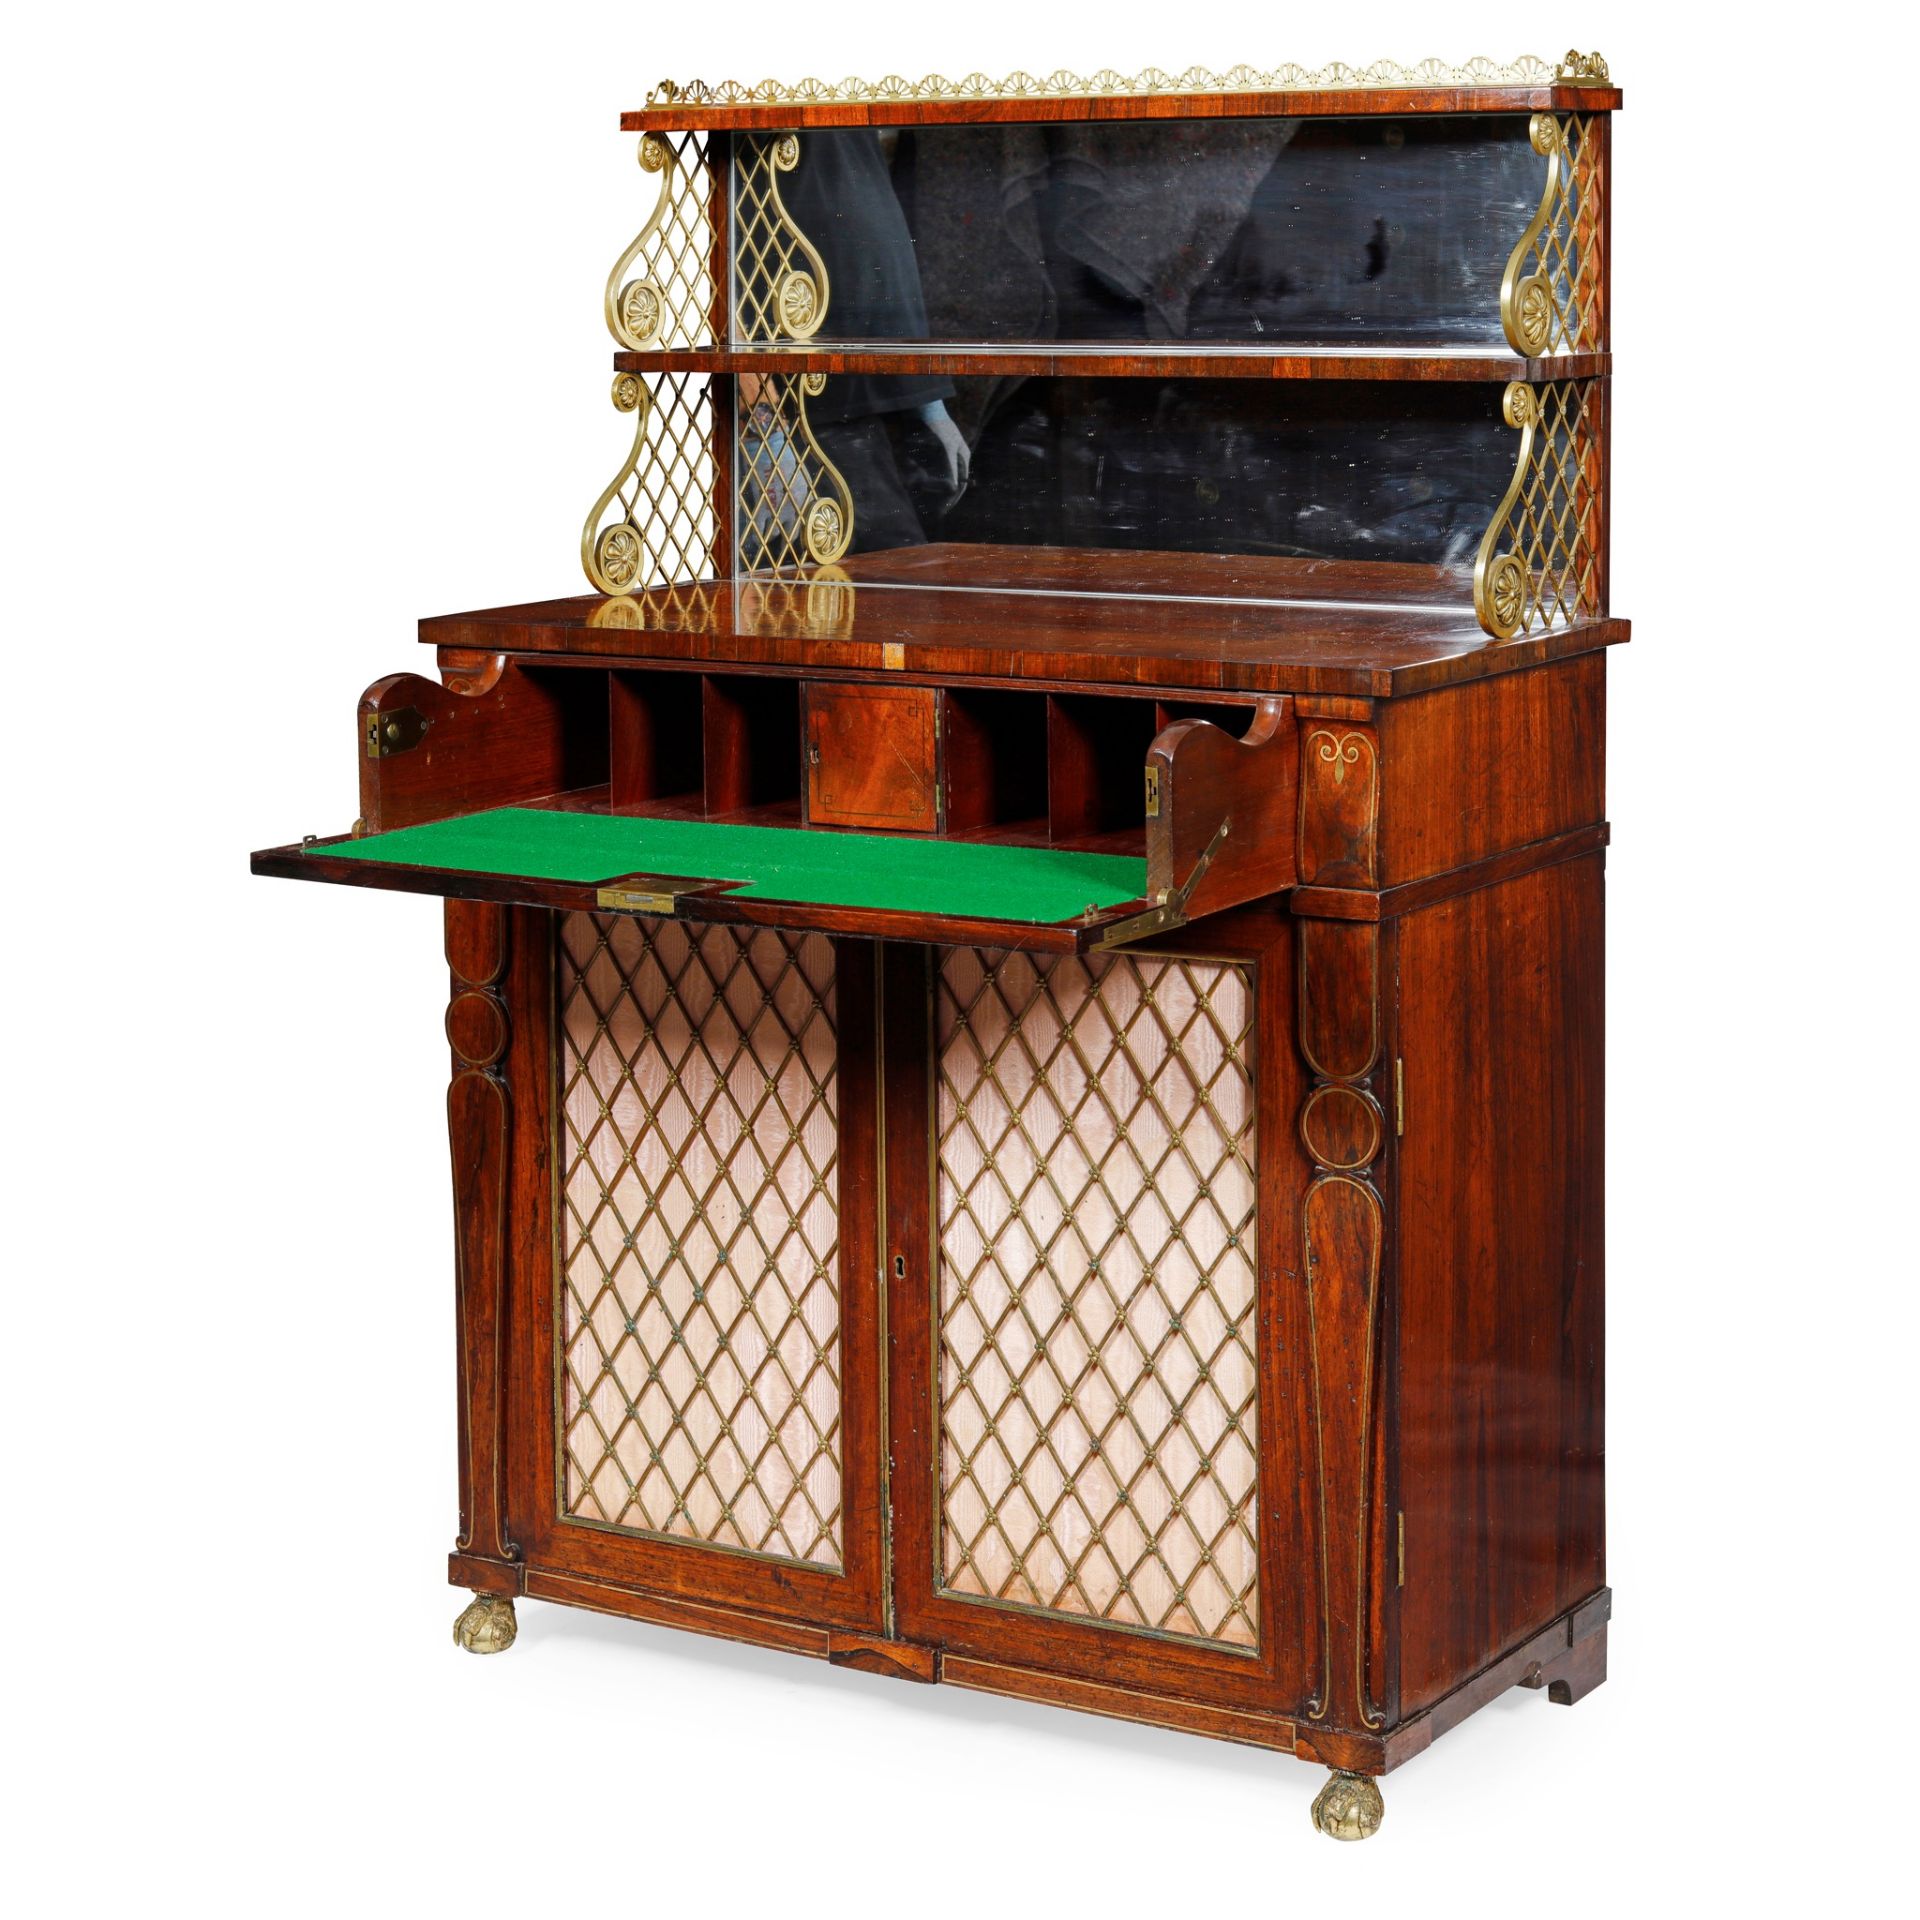 Y REGENCY ROSEWOOD AND BRASS MOUNTED SECRETAIRE CHIFFONIER EARLY 19TH CENTURY - Image 2 of 3